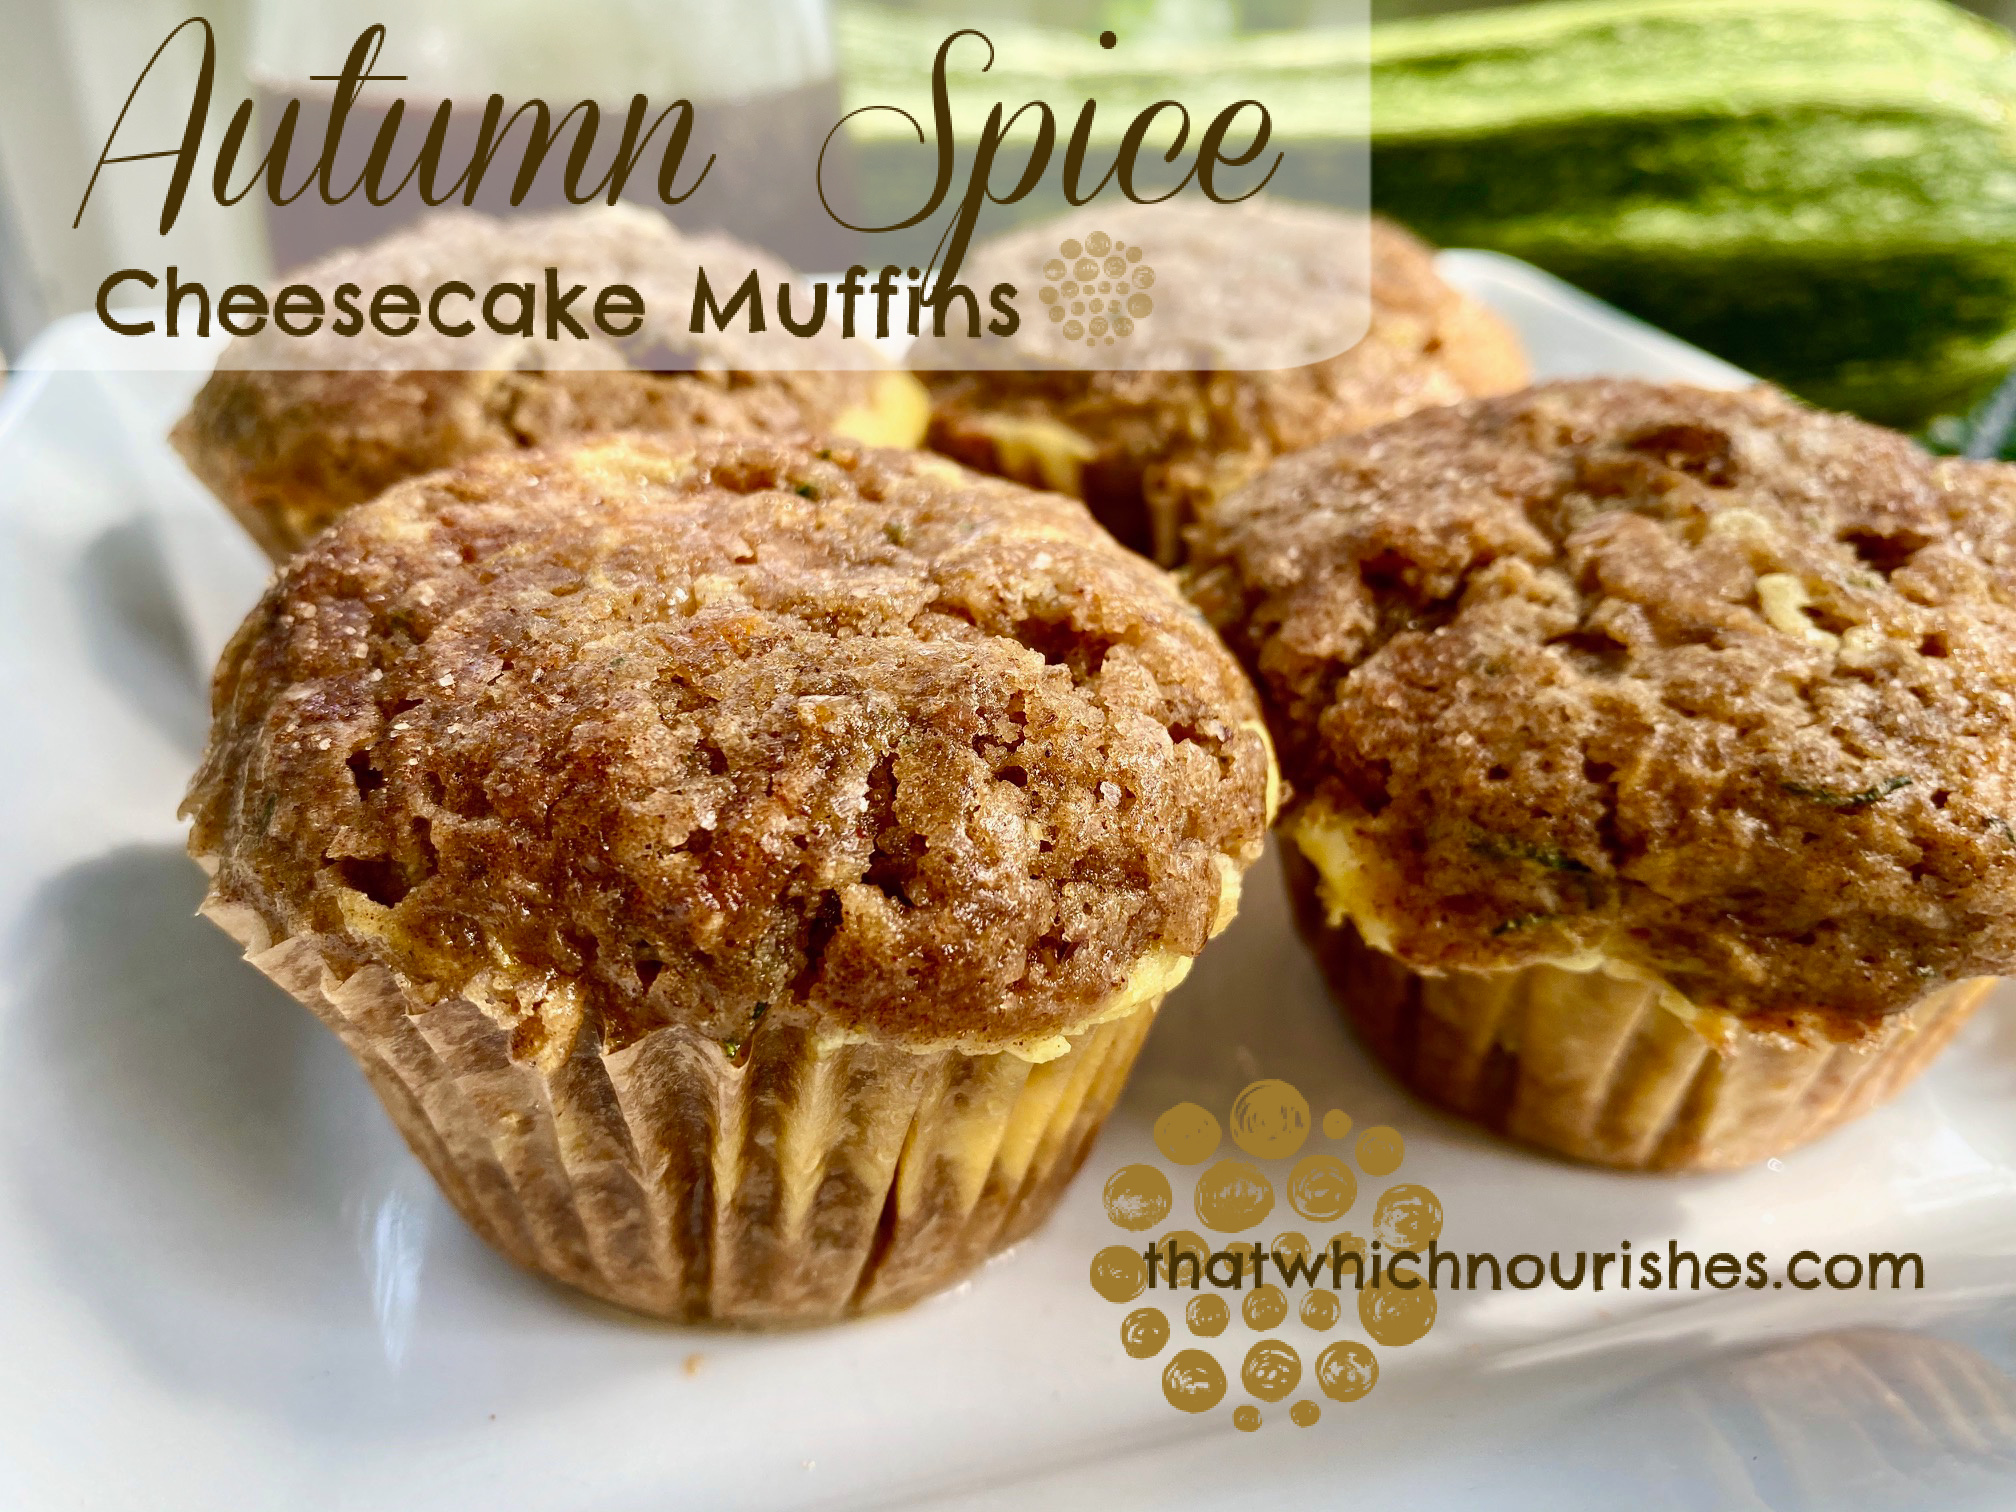 Autumn Spiced Cheesecake Muffins -- Soft, moist muffins spiced with all the warm, Autumn spices and layered with stripe of cheesecake-goodness. Filled with zucchini, carrots, coconut oil, and maple syrup, these beauties are as nourishing as they are delicious! | thatwhichnourishes.com